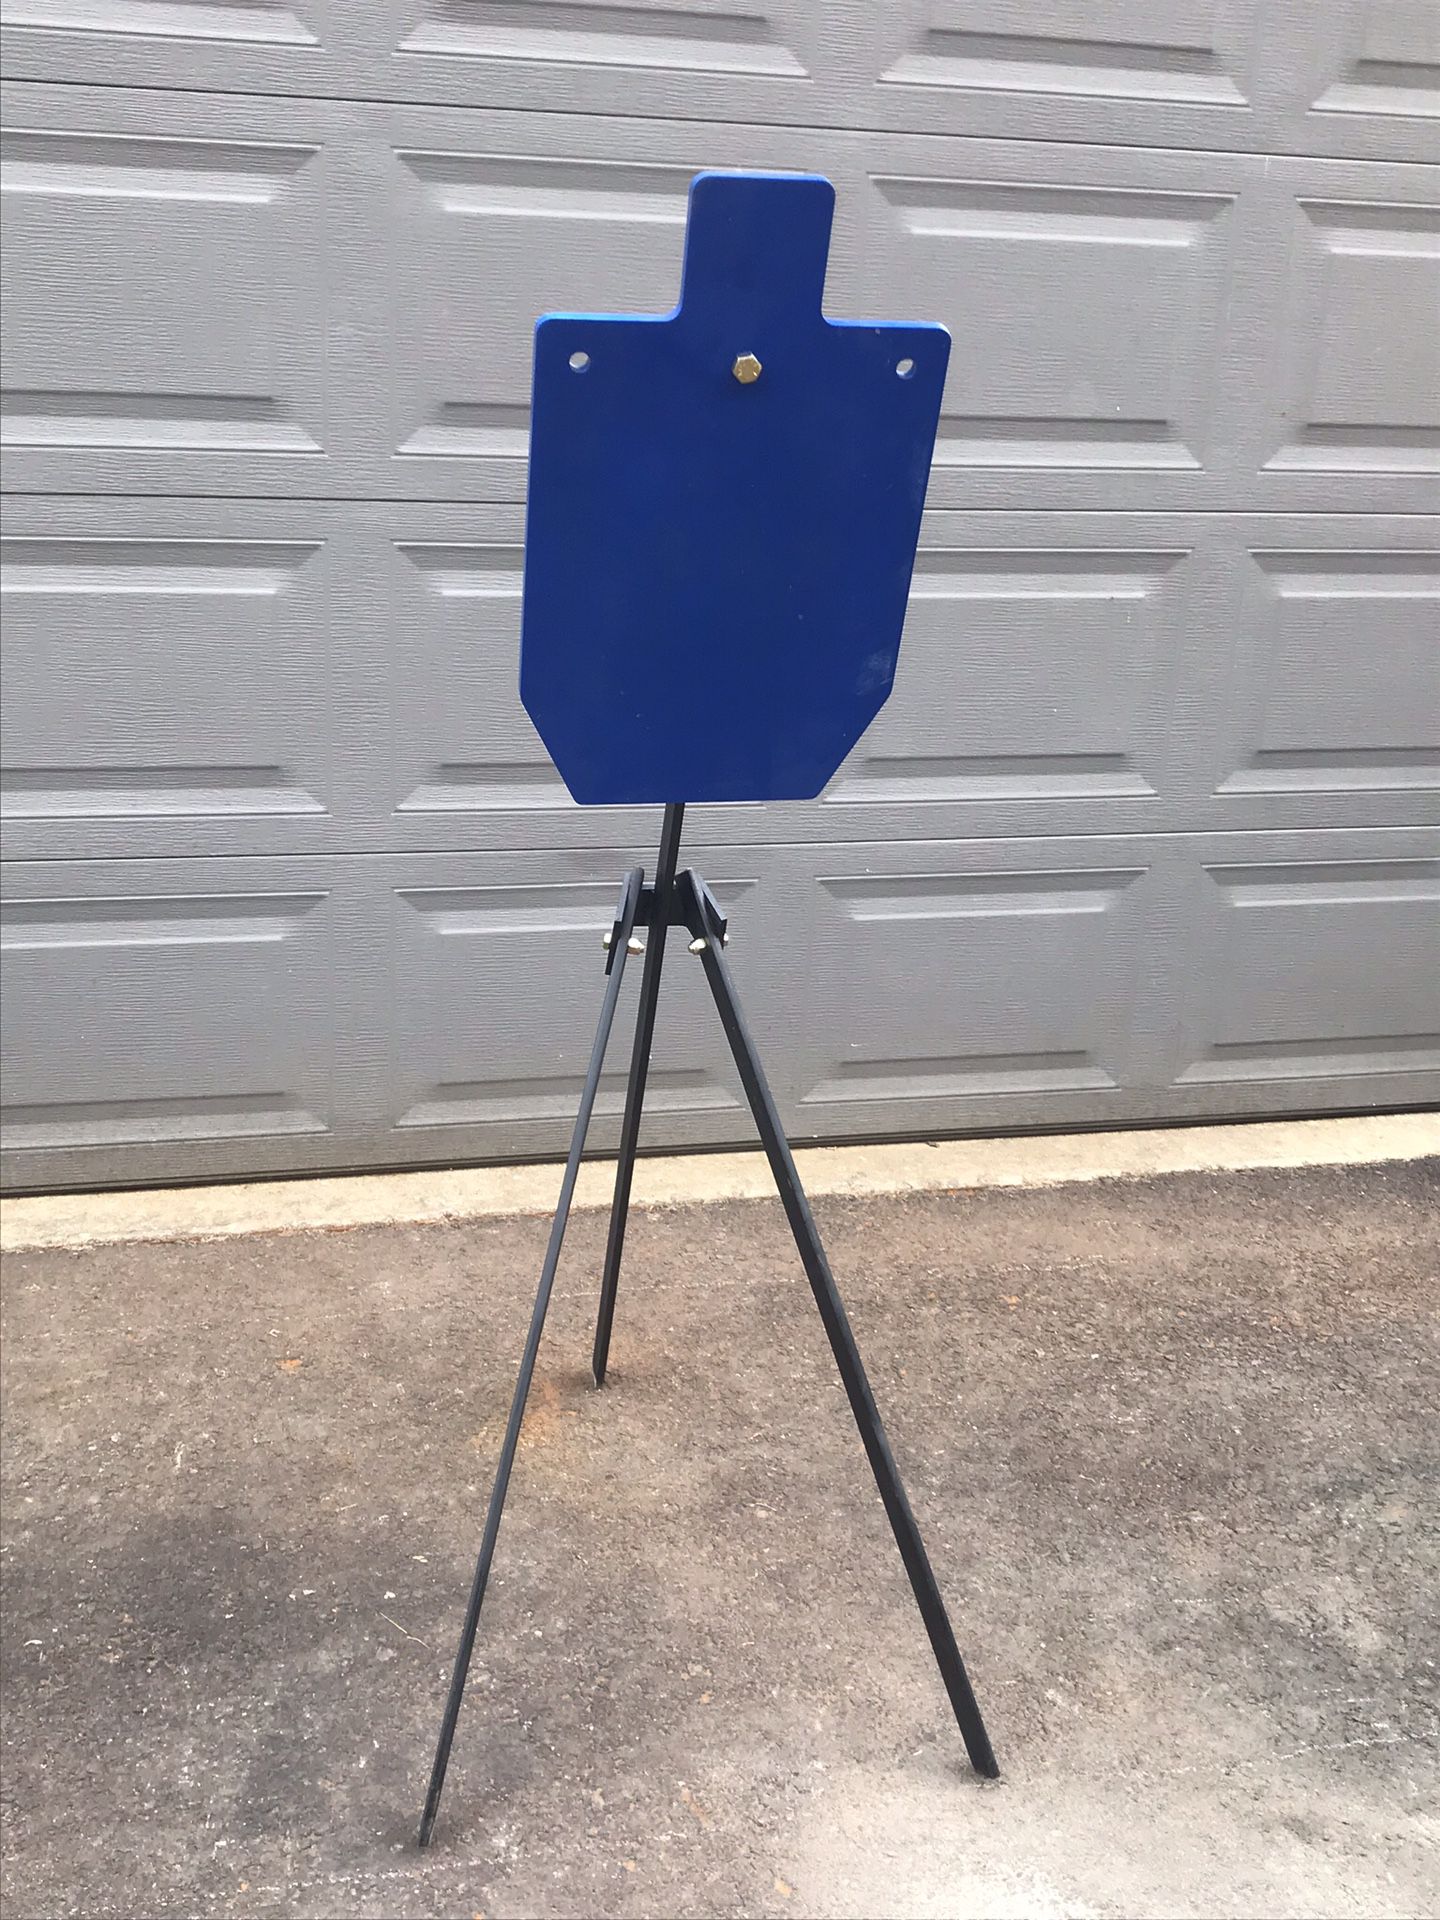 AR500 silhouette target and stand